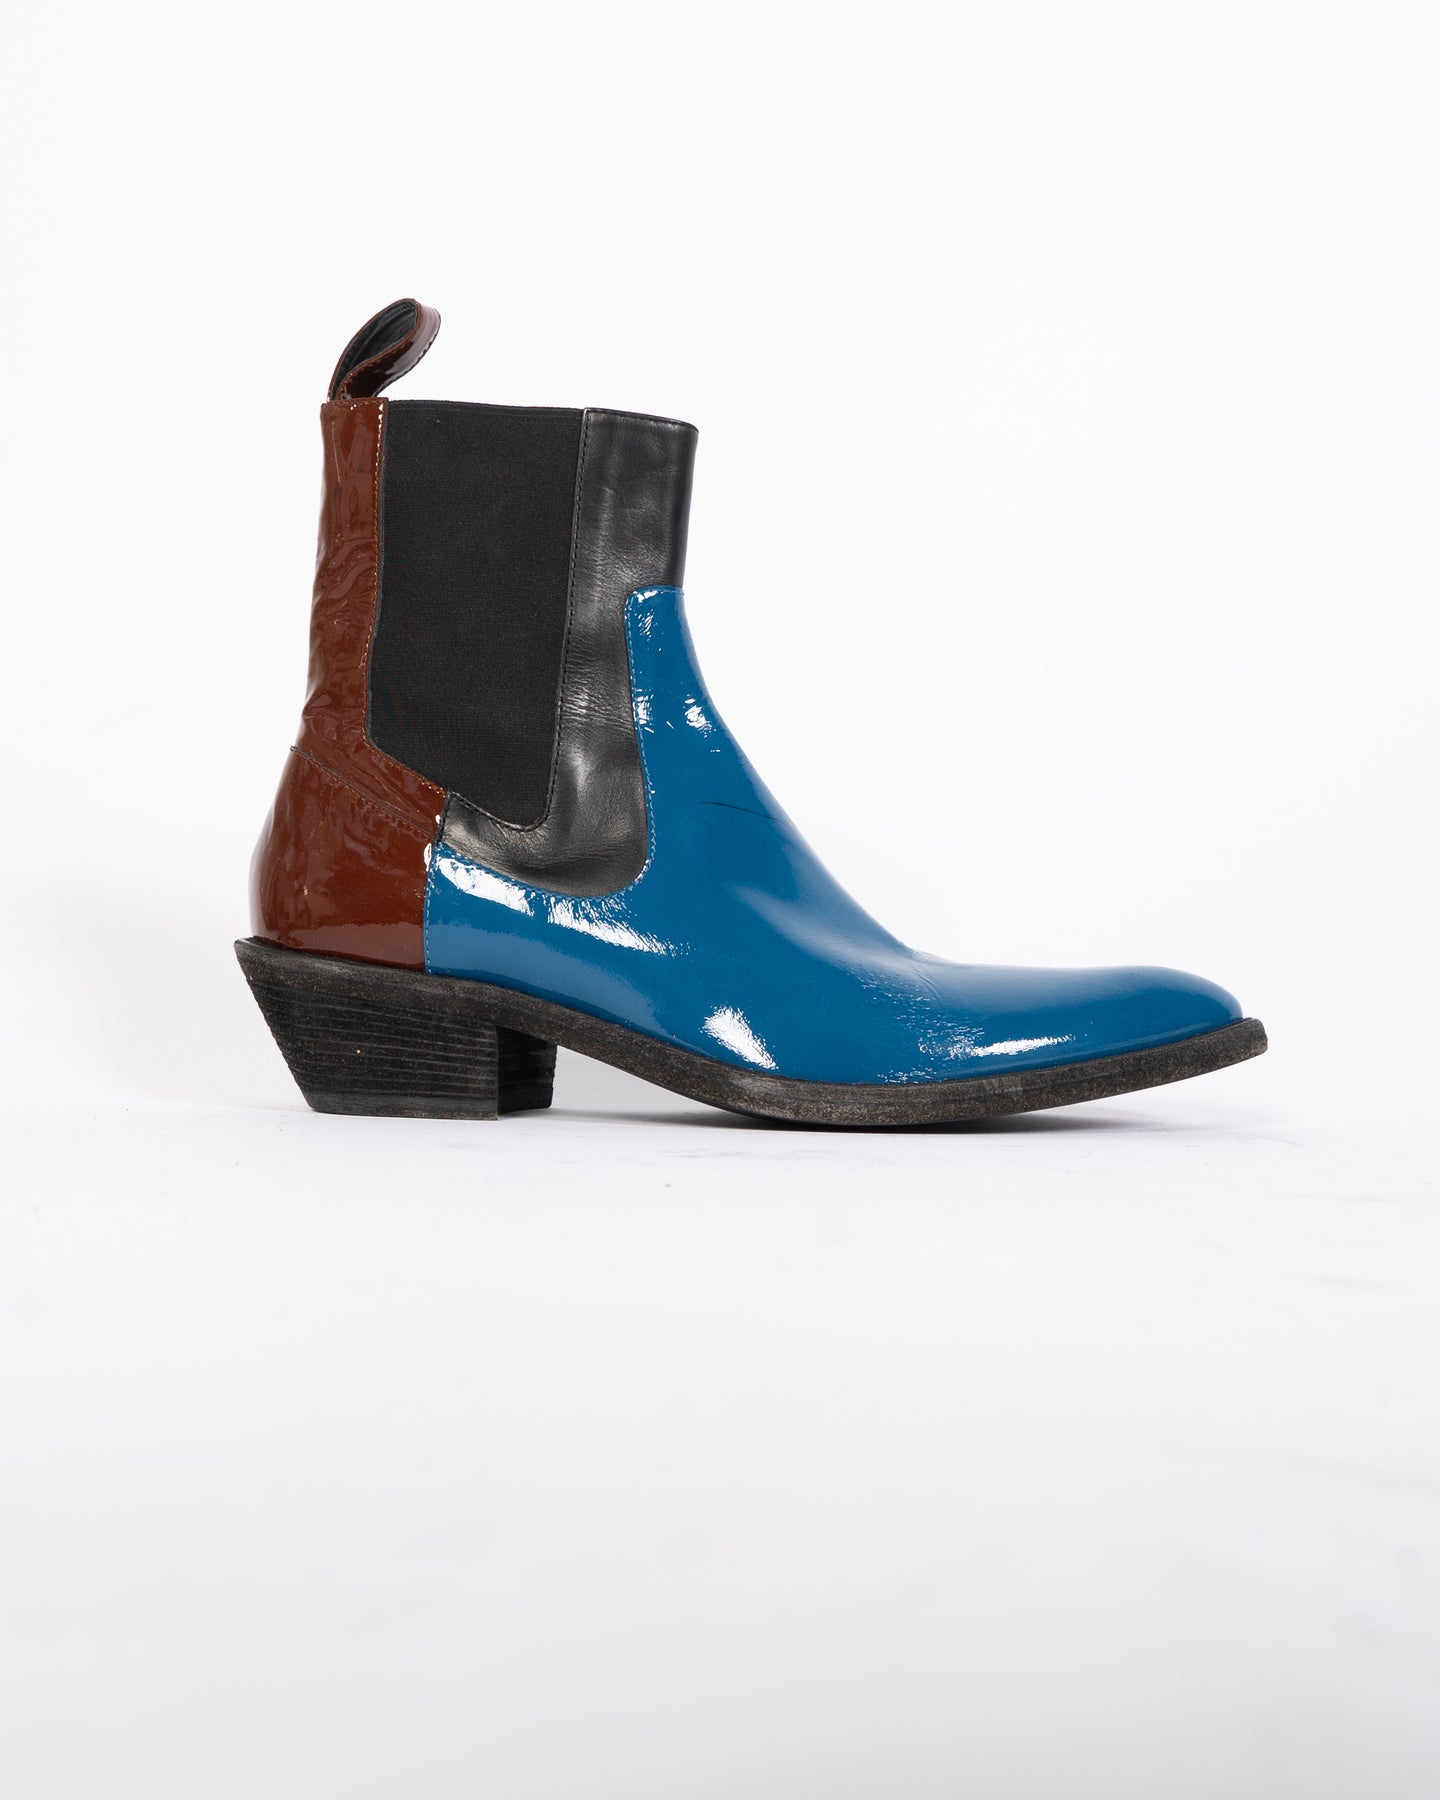 FW19 Bicolor Patent Leather Boots 1of1 Sample